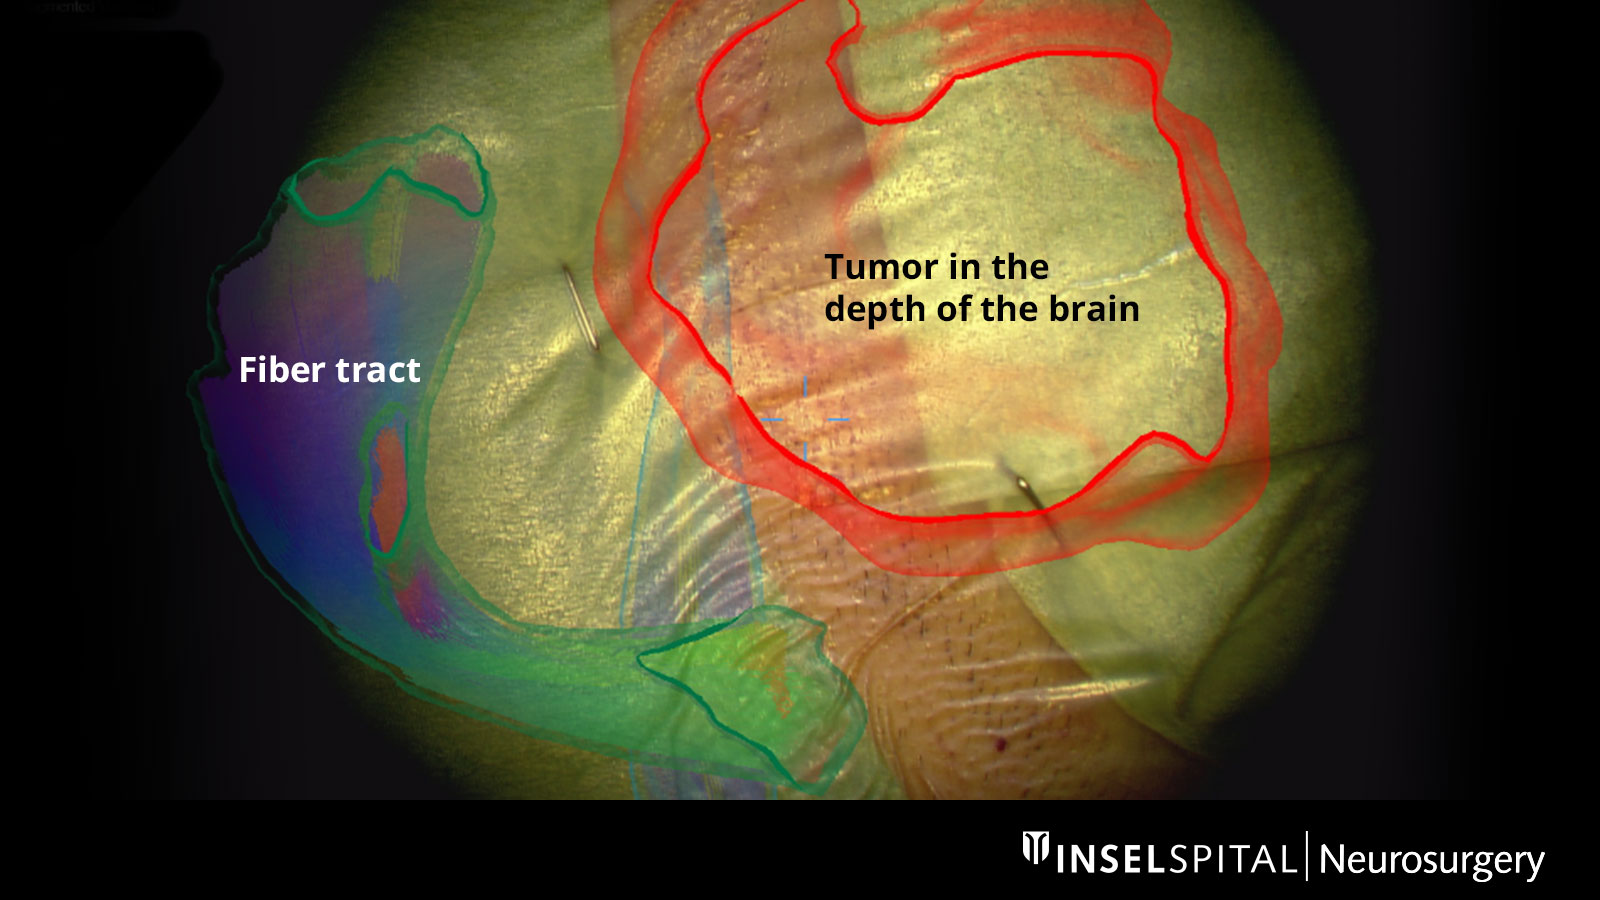 Augmented reality image of the skull. The tumor projected onto the head is circled in red. The fiber tracts are marked in color.